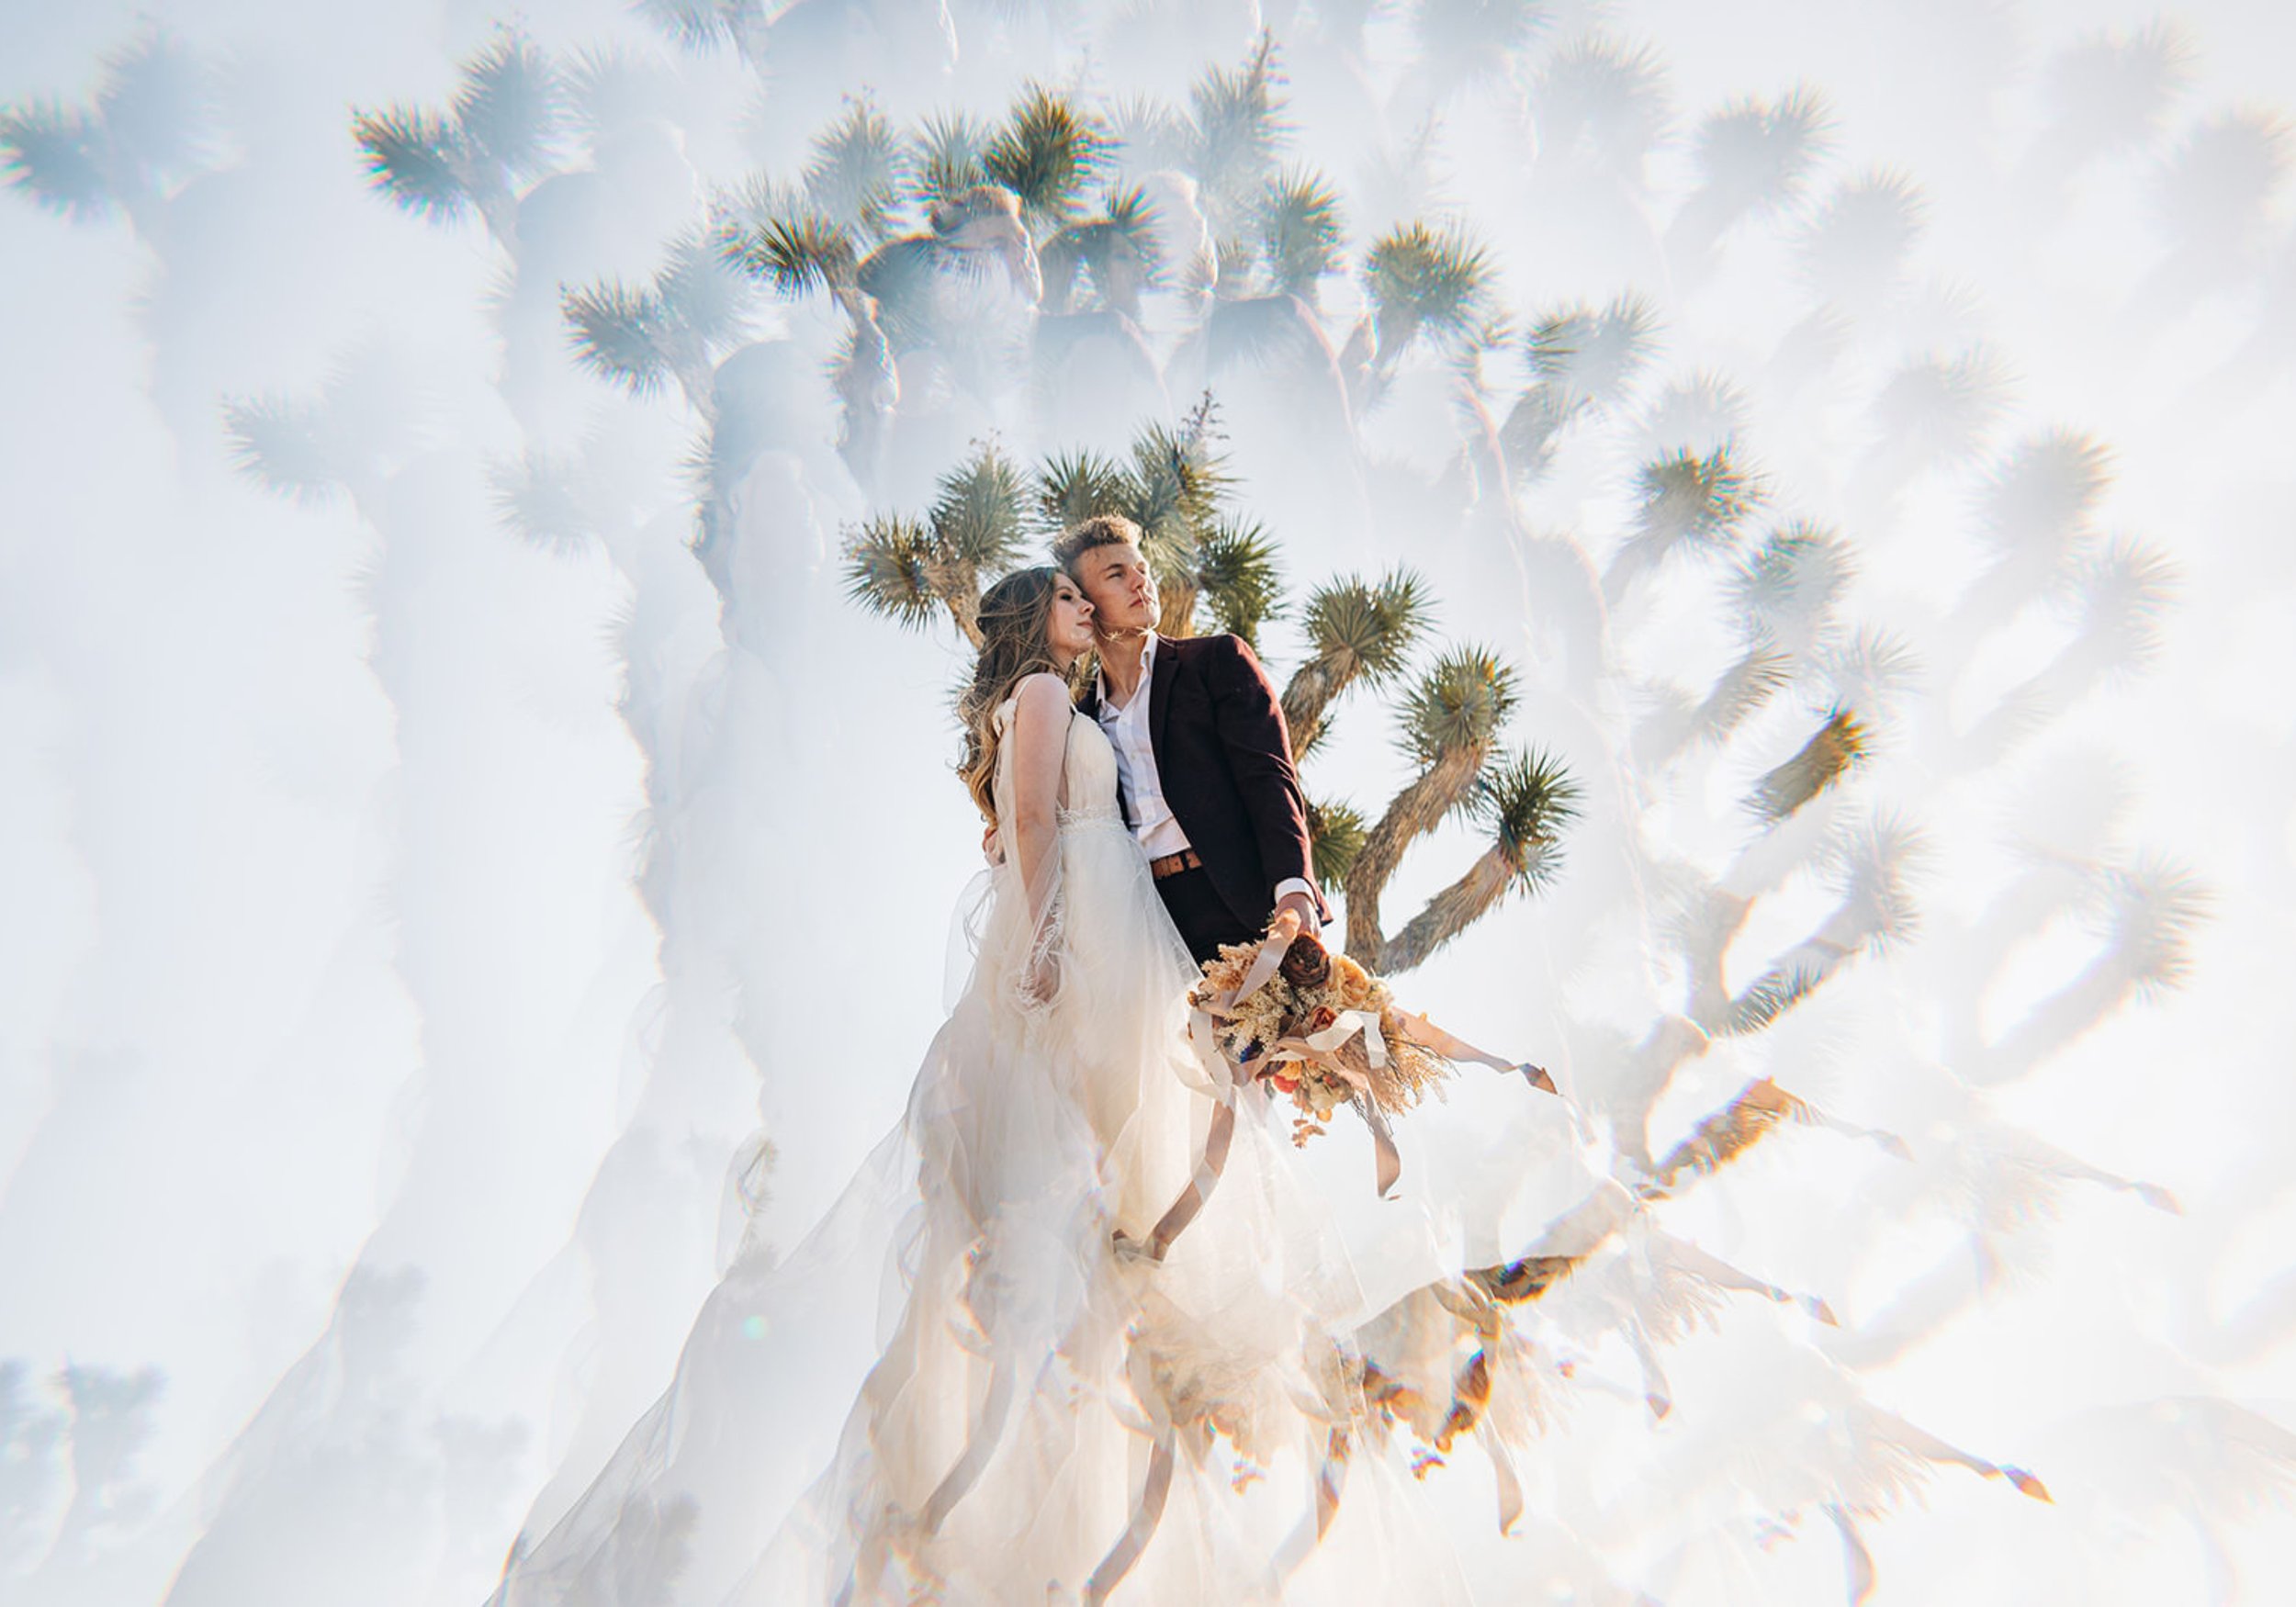 Newlywed couple looking off into the distance with a cactus behind them